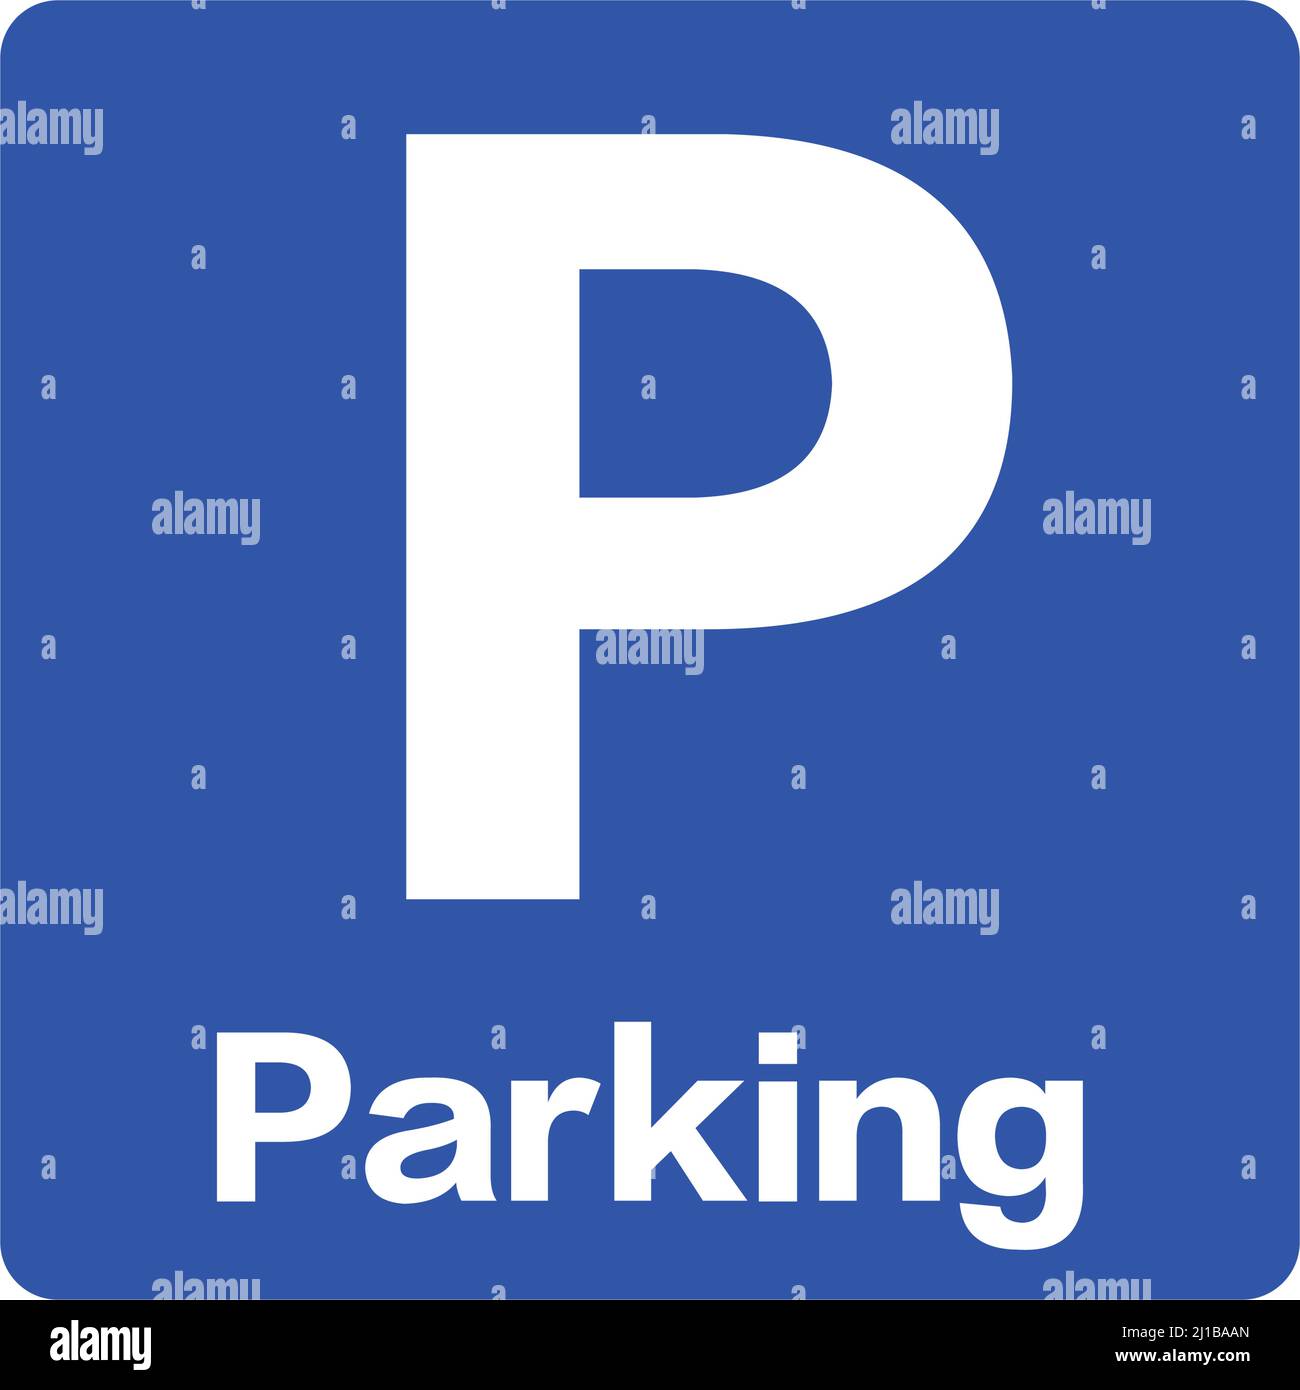 Parking lot icon. Parking sign. Editable vector. Stock Vector